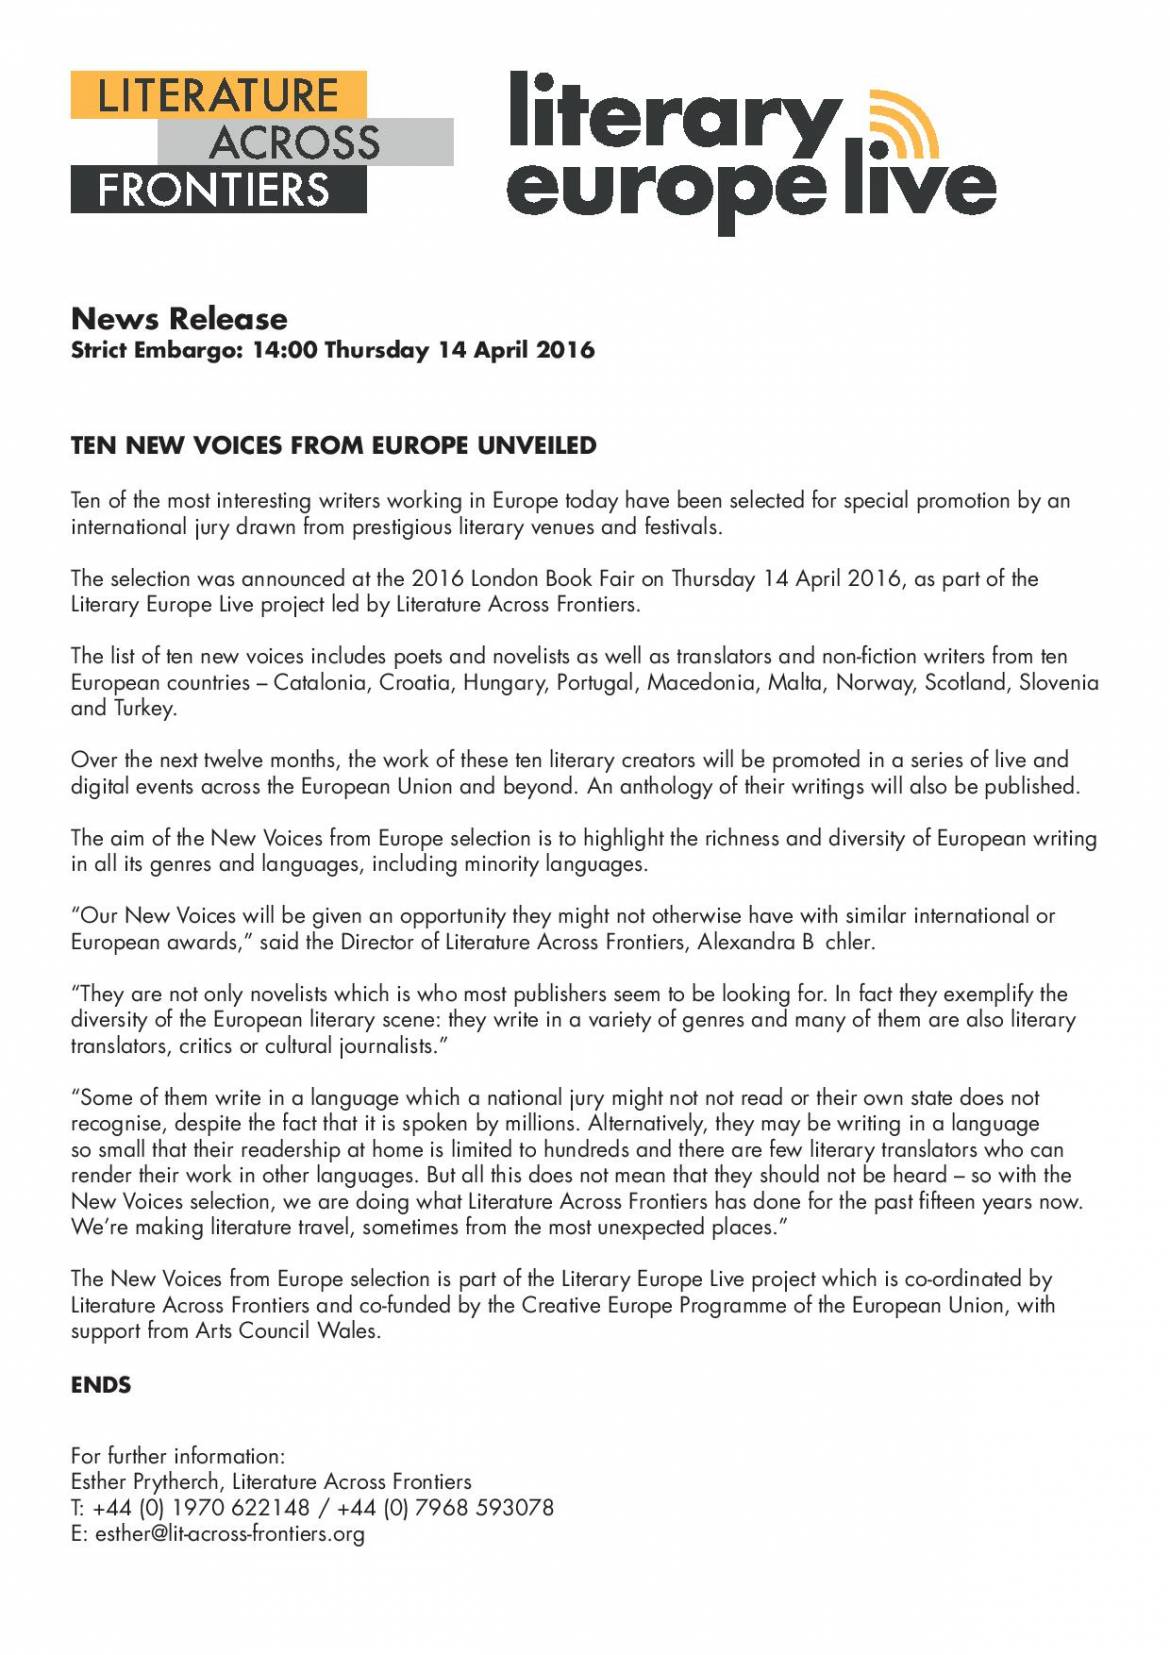 News-Release-New-Voices-Strict-Embargo-1400-14-April-2016-Final-1-page-001.jpg